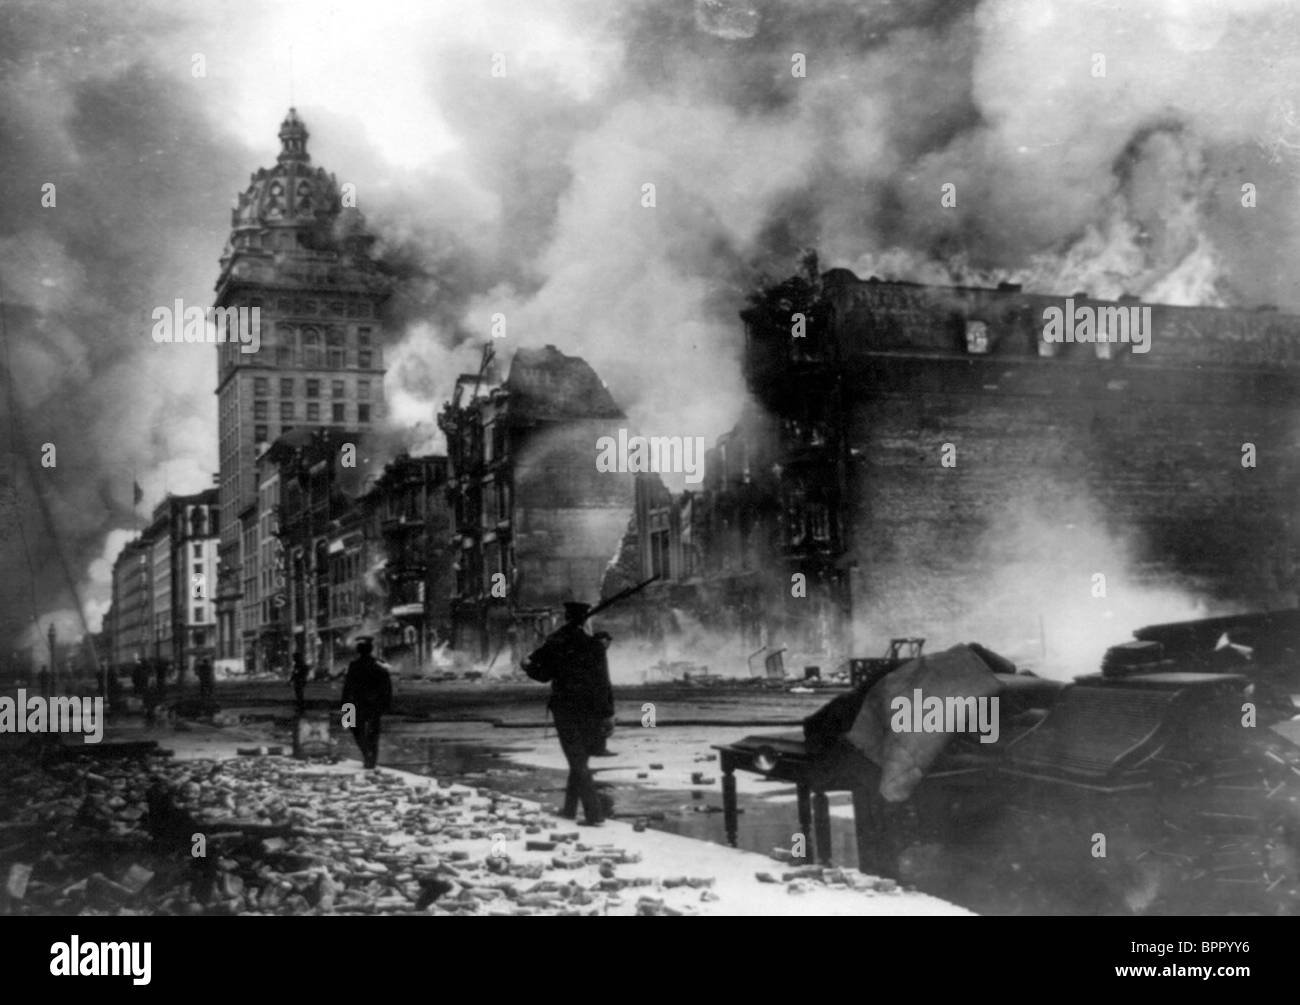 Fire on Market Street - View of street in San Francisco, California, earthquake aftermath with man patrolling with gun Stock Photo